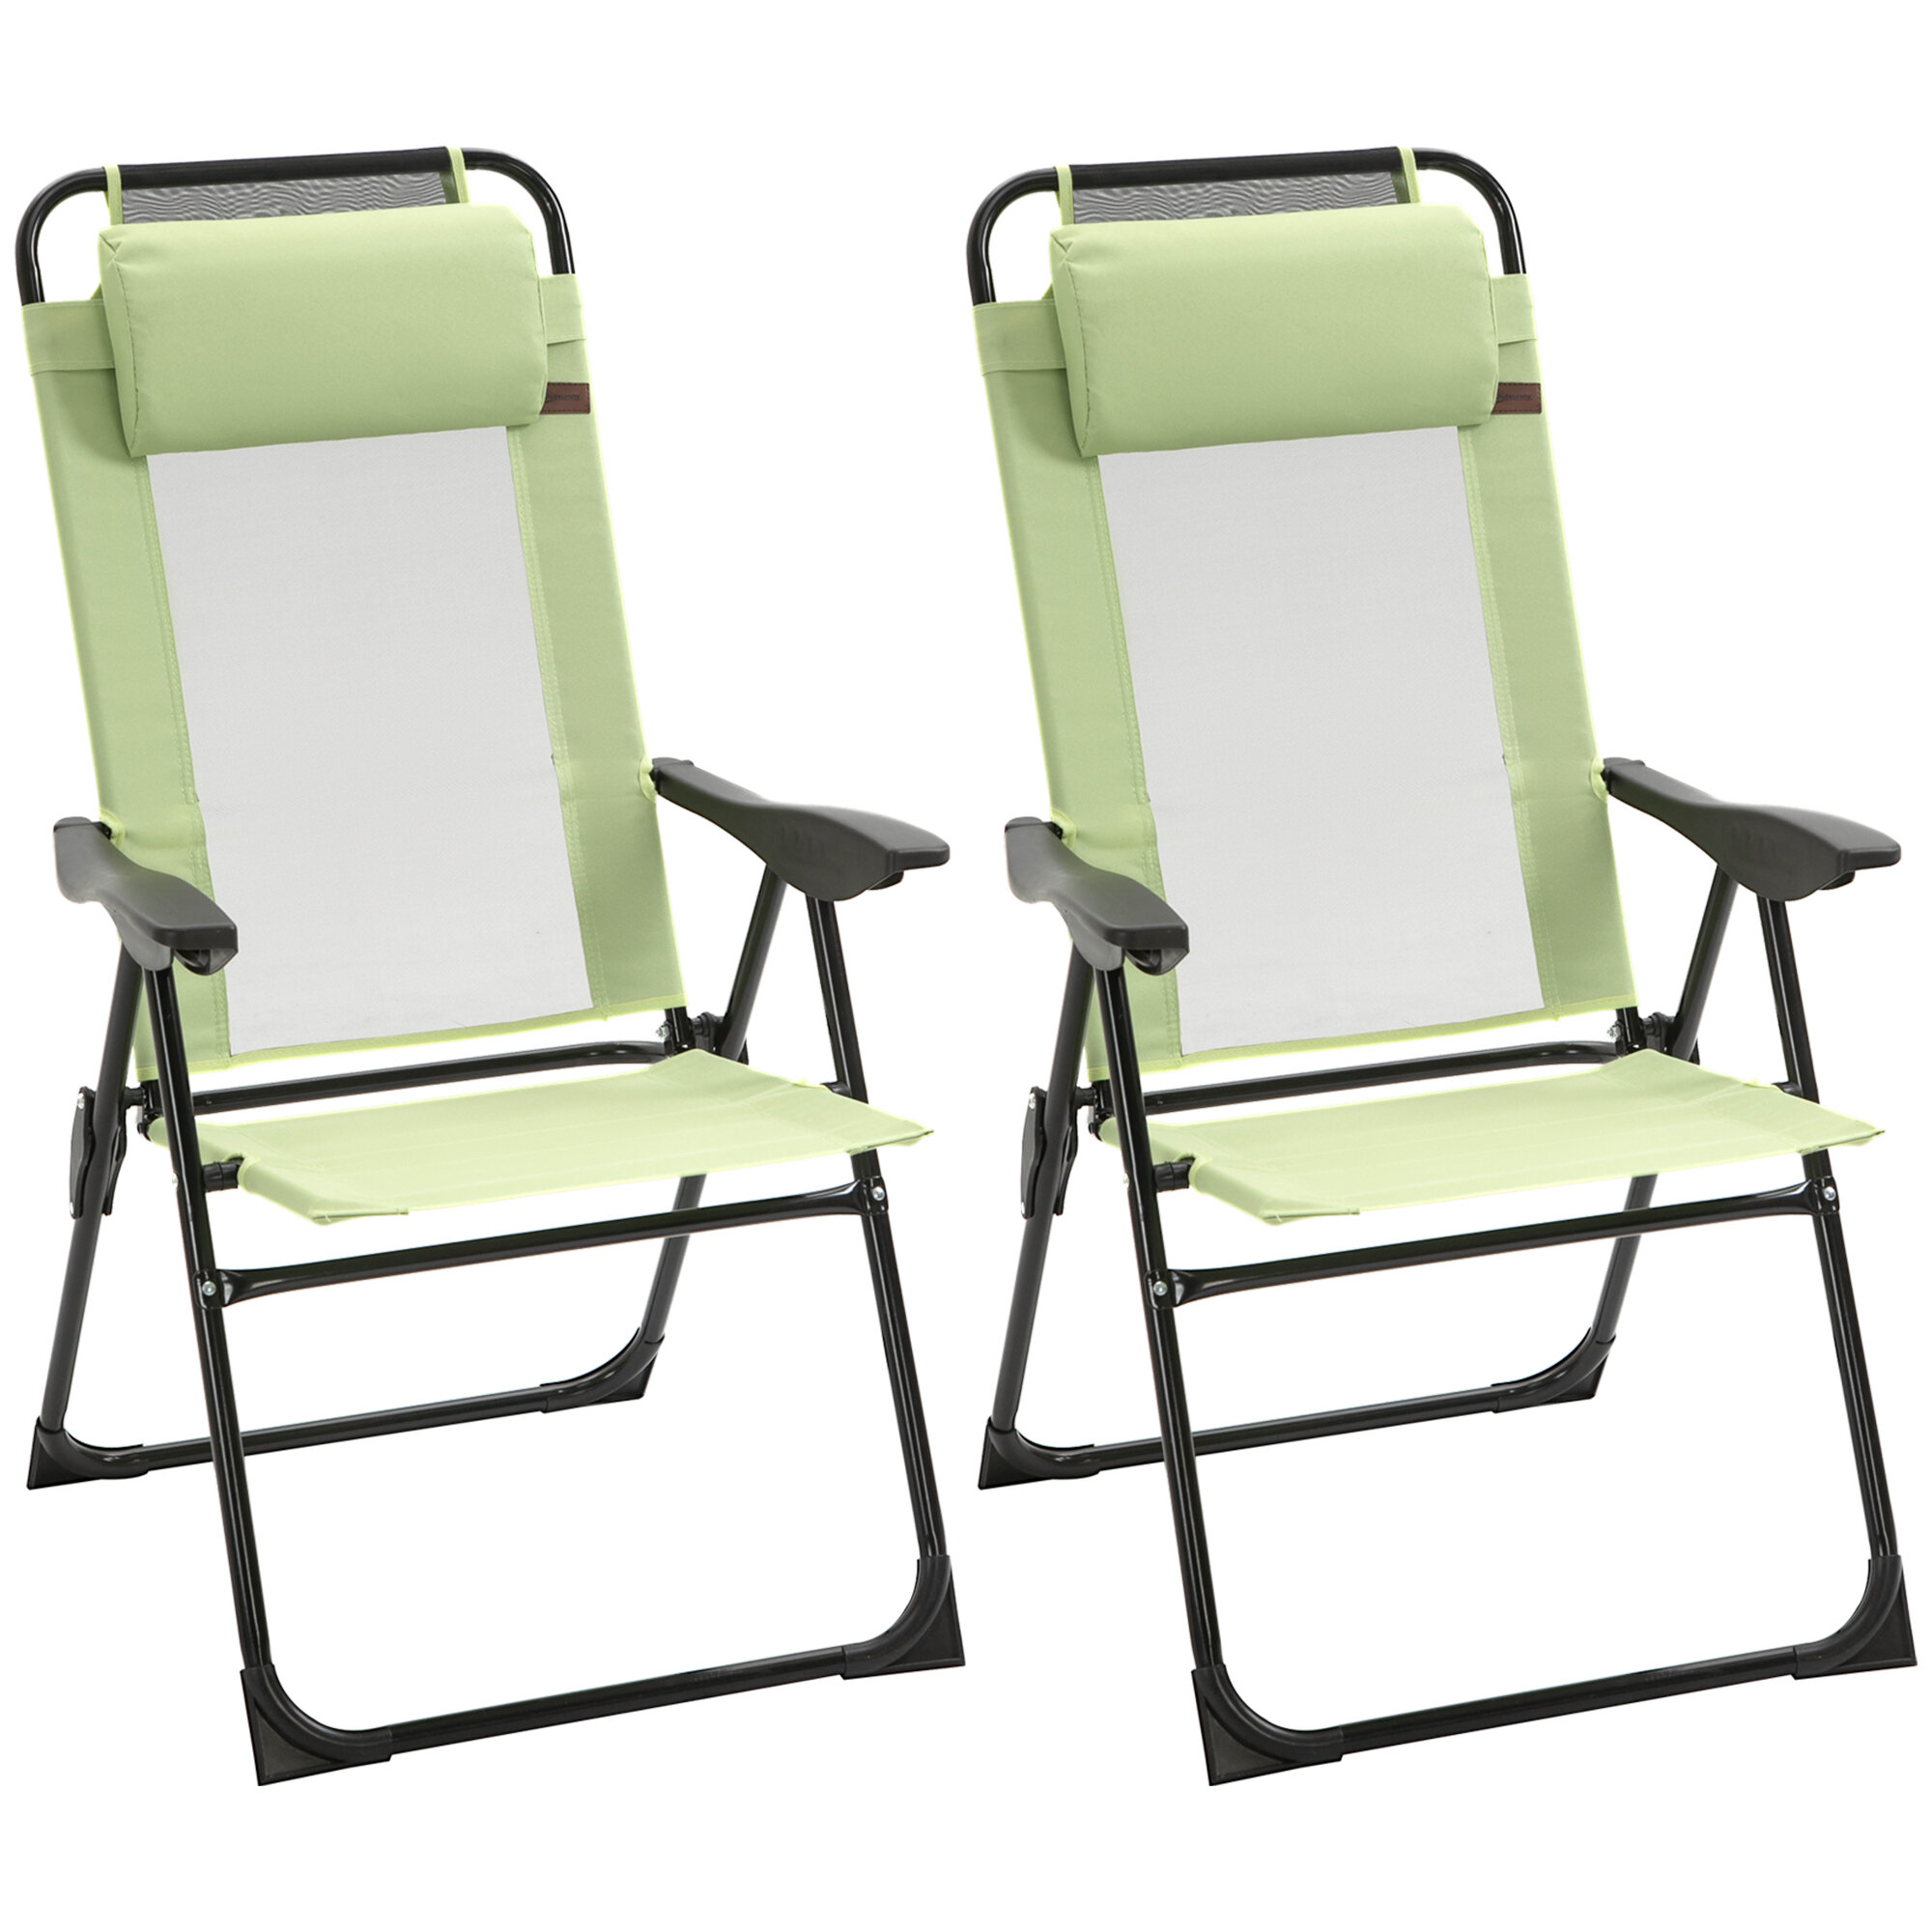 Jahvarni Portable Folding Camping Chair Arlmont & Co. Color: Green